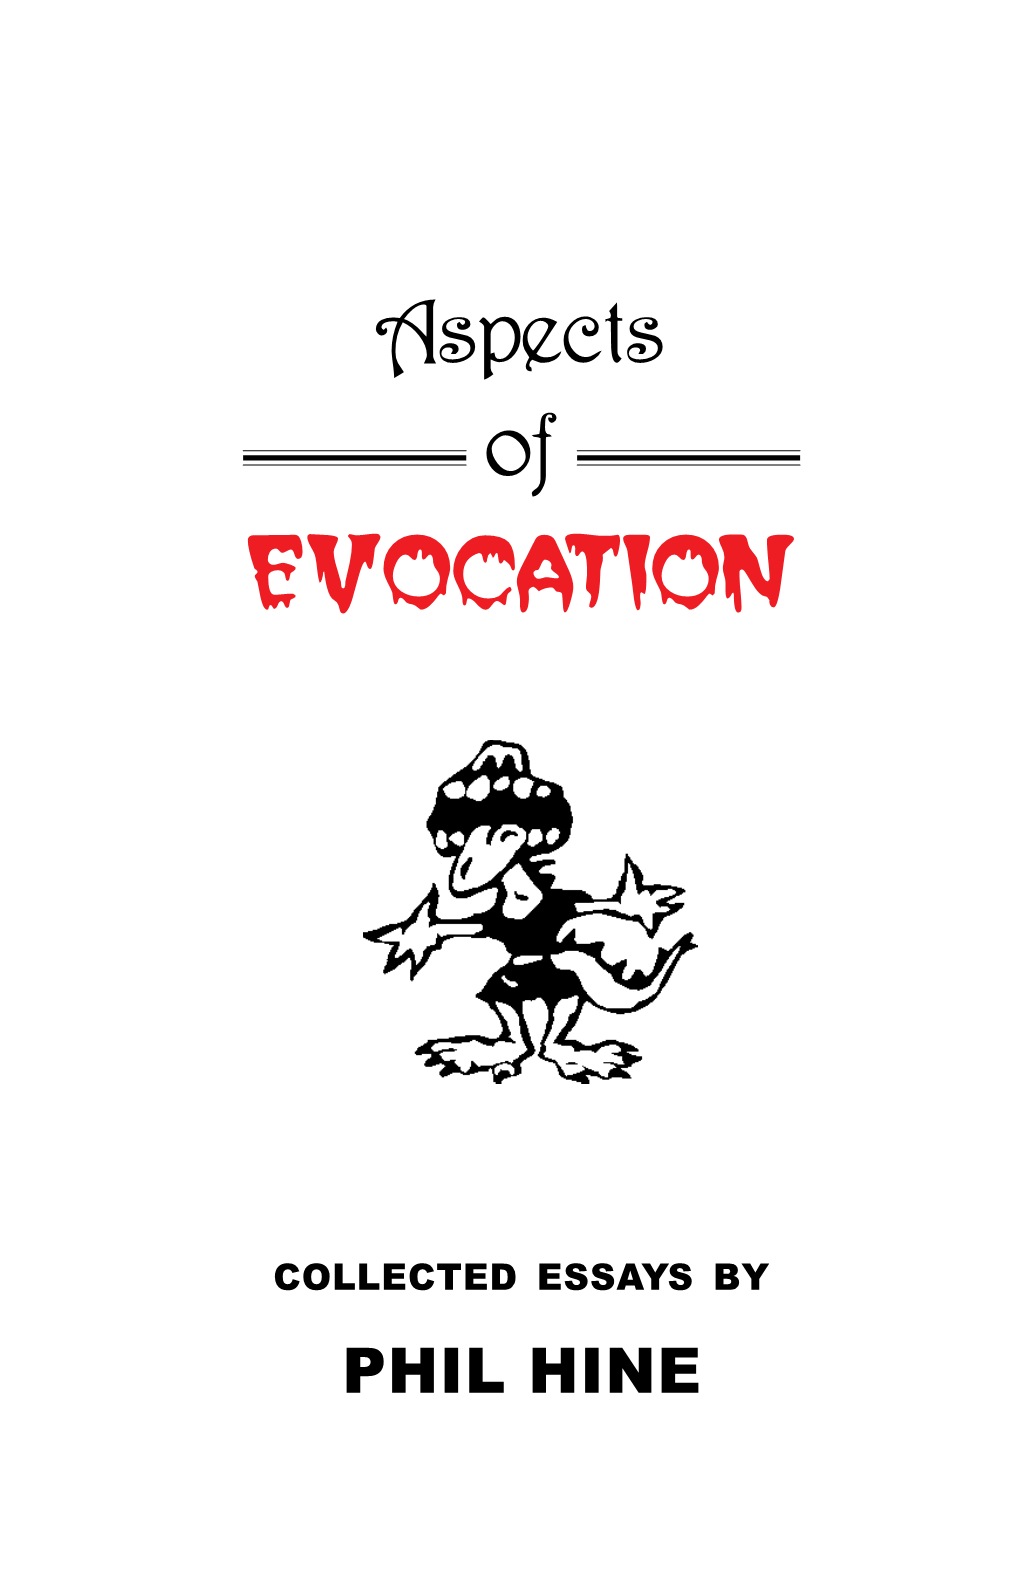 Aspects of EVOCATION